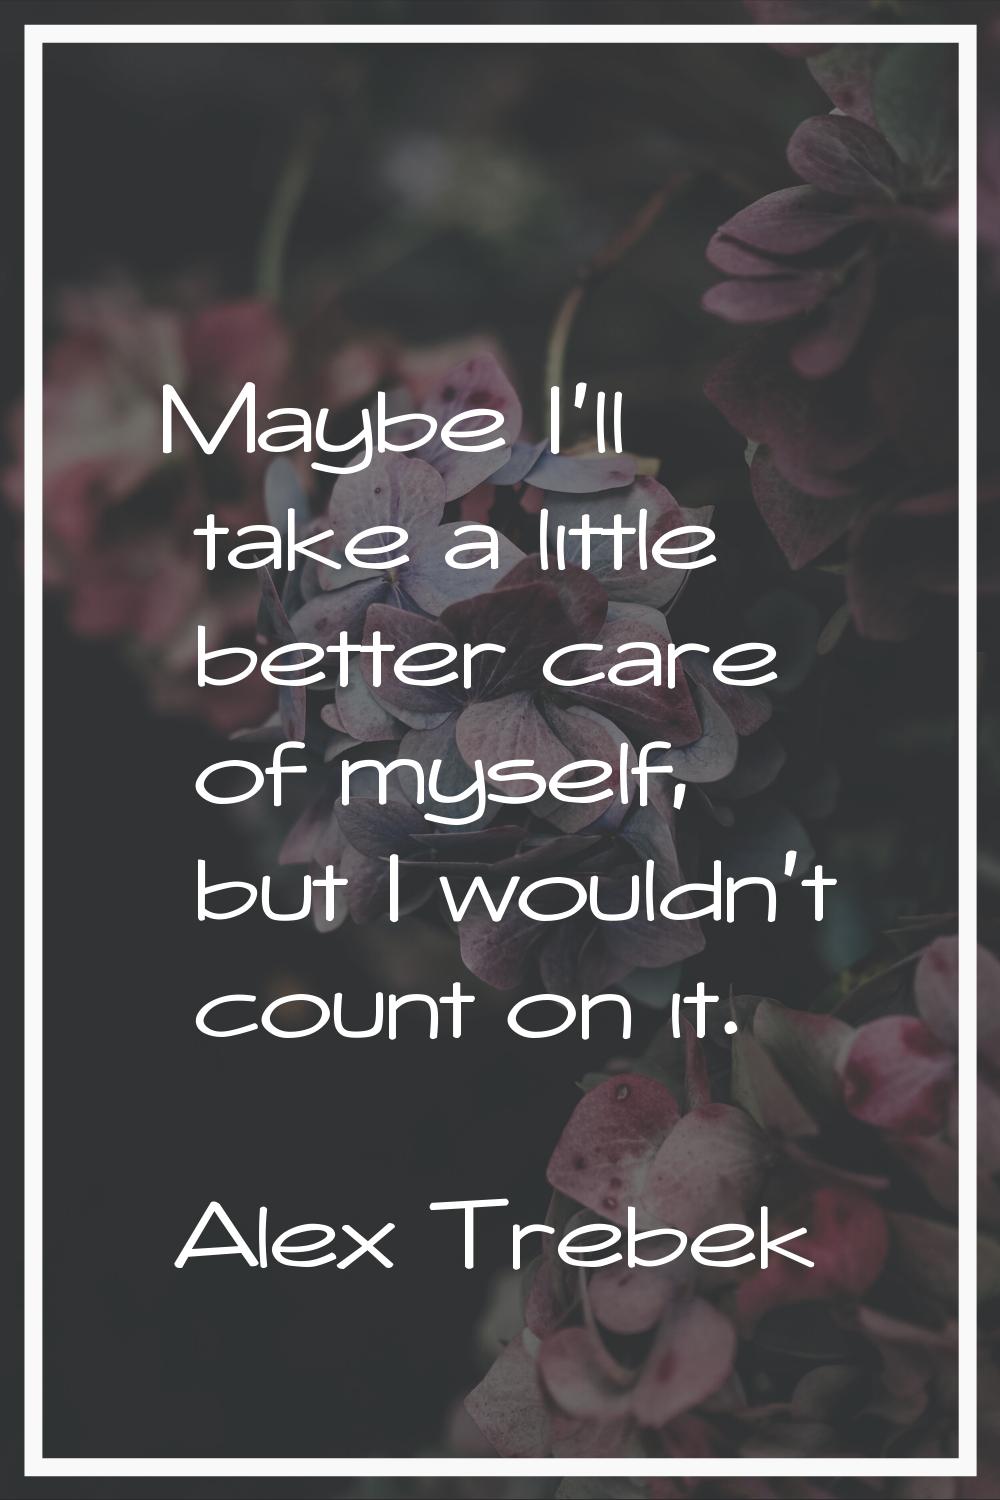 Maybe I'll take a little better care of myself, but I wouldn't count on it.